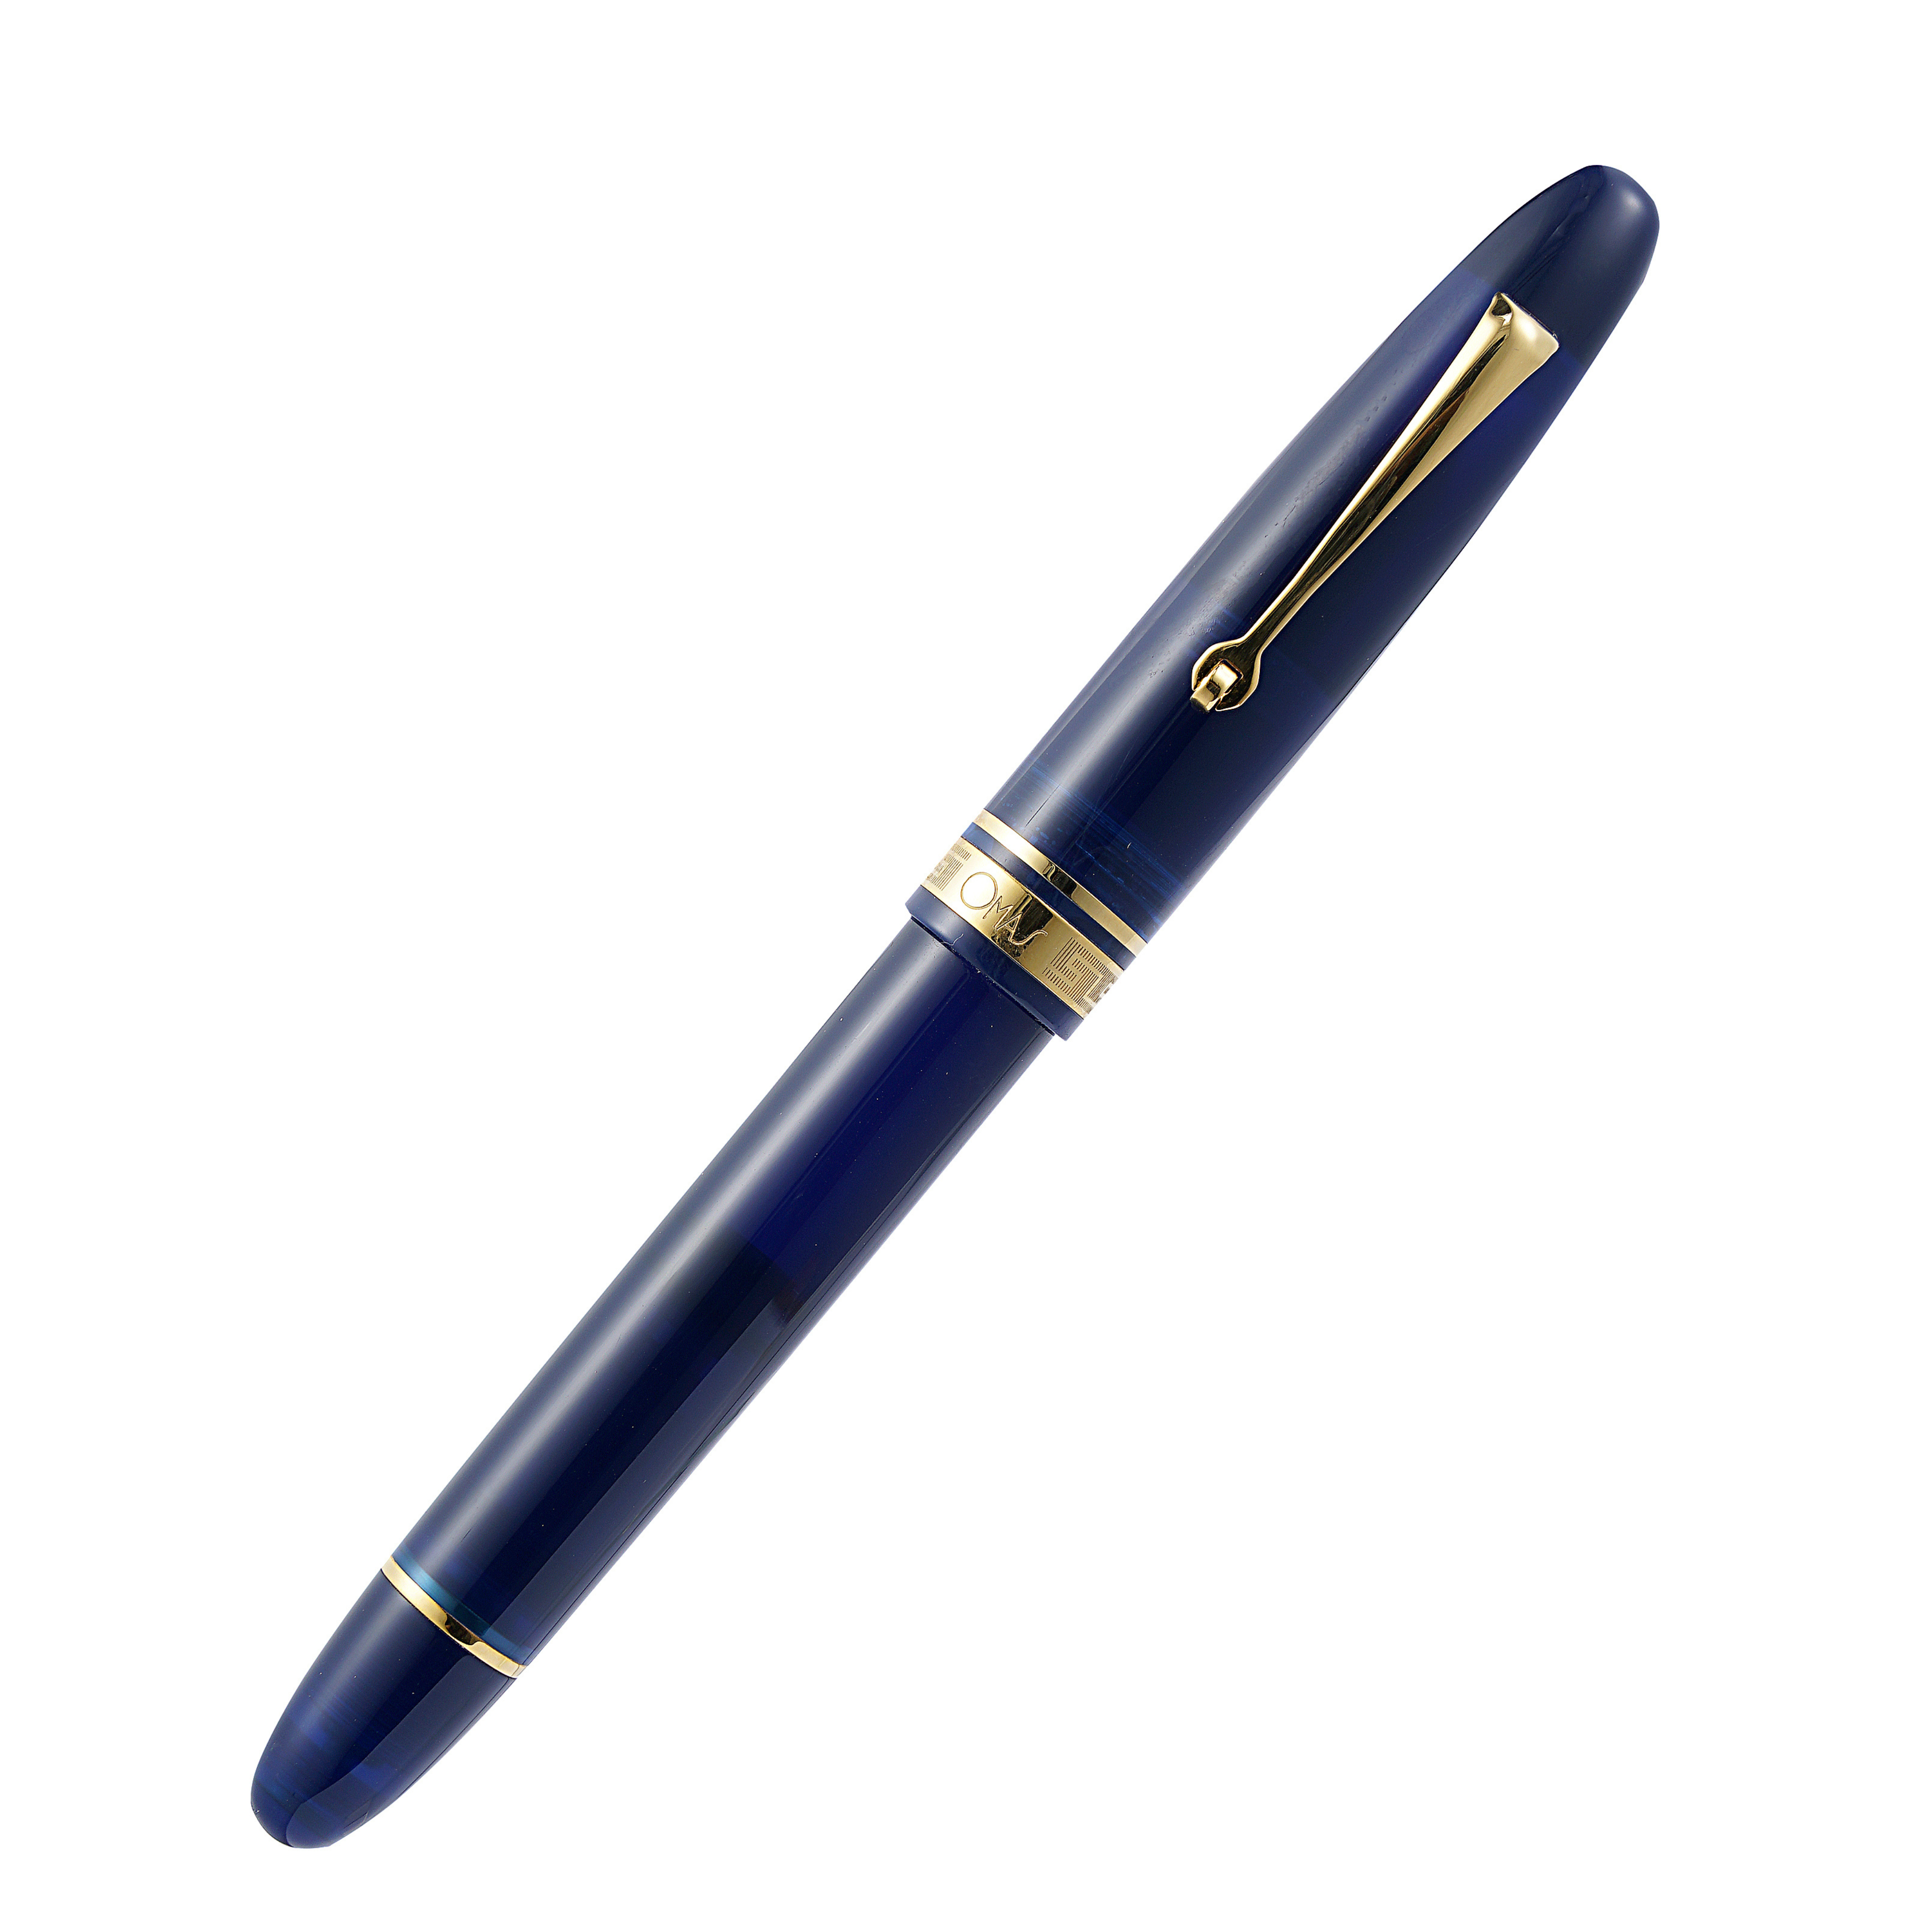 Omas Ogiva Fountain Pen in Blu with Gold Trim